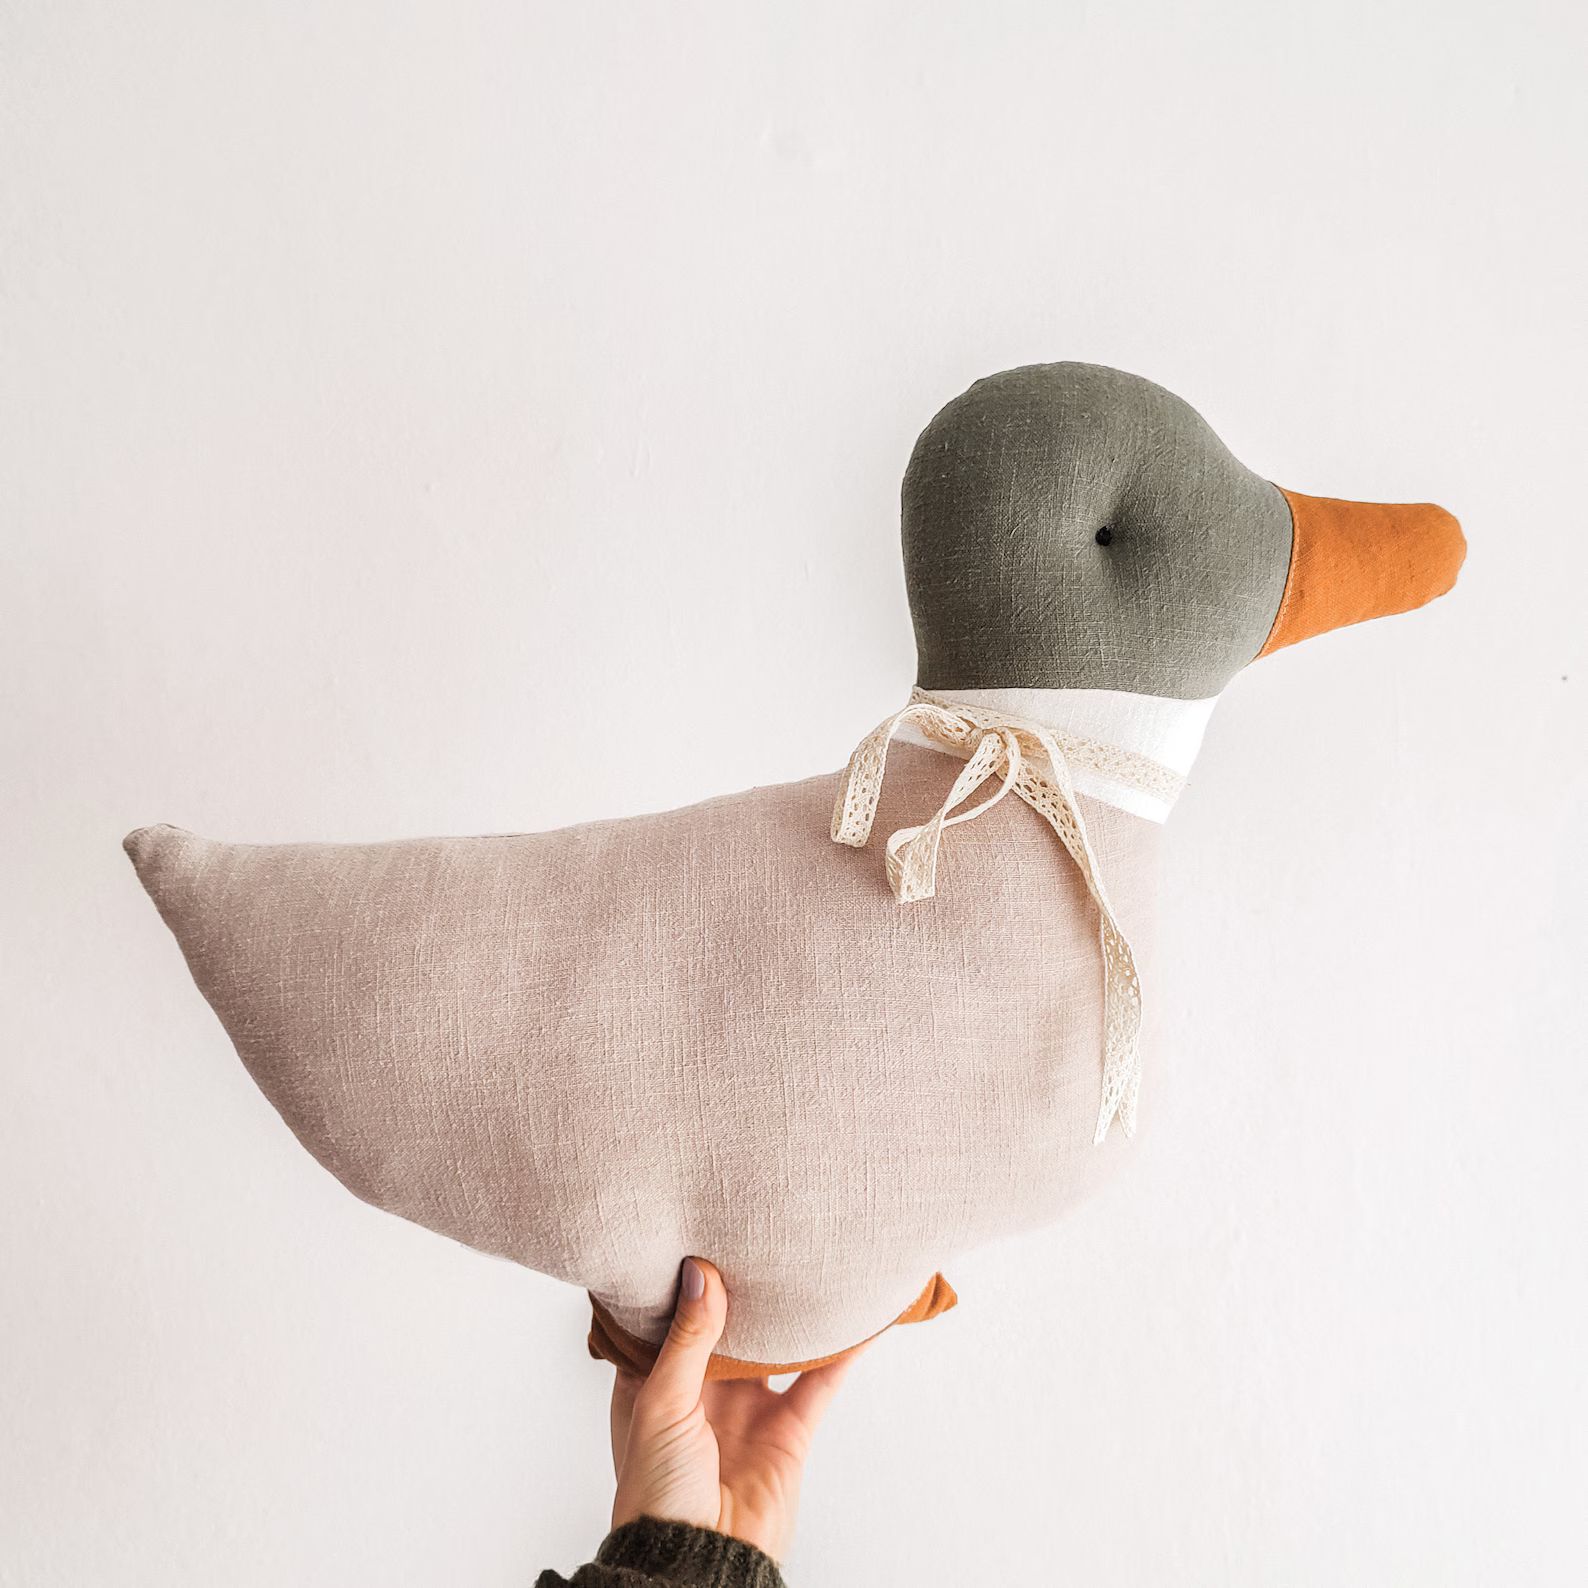 Duck Shaped Cushion, Green Duck, Duck Pillow, Decorative Soft Duck, Bed Decoration, Duck Mascot, ... | Etsy (US)